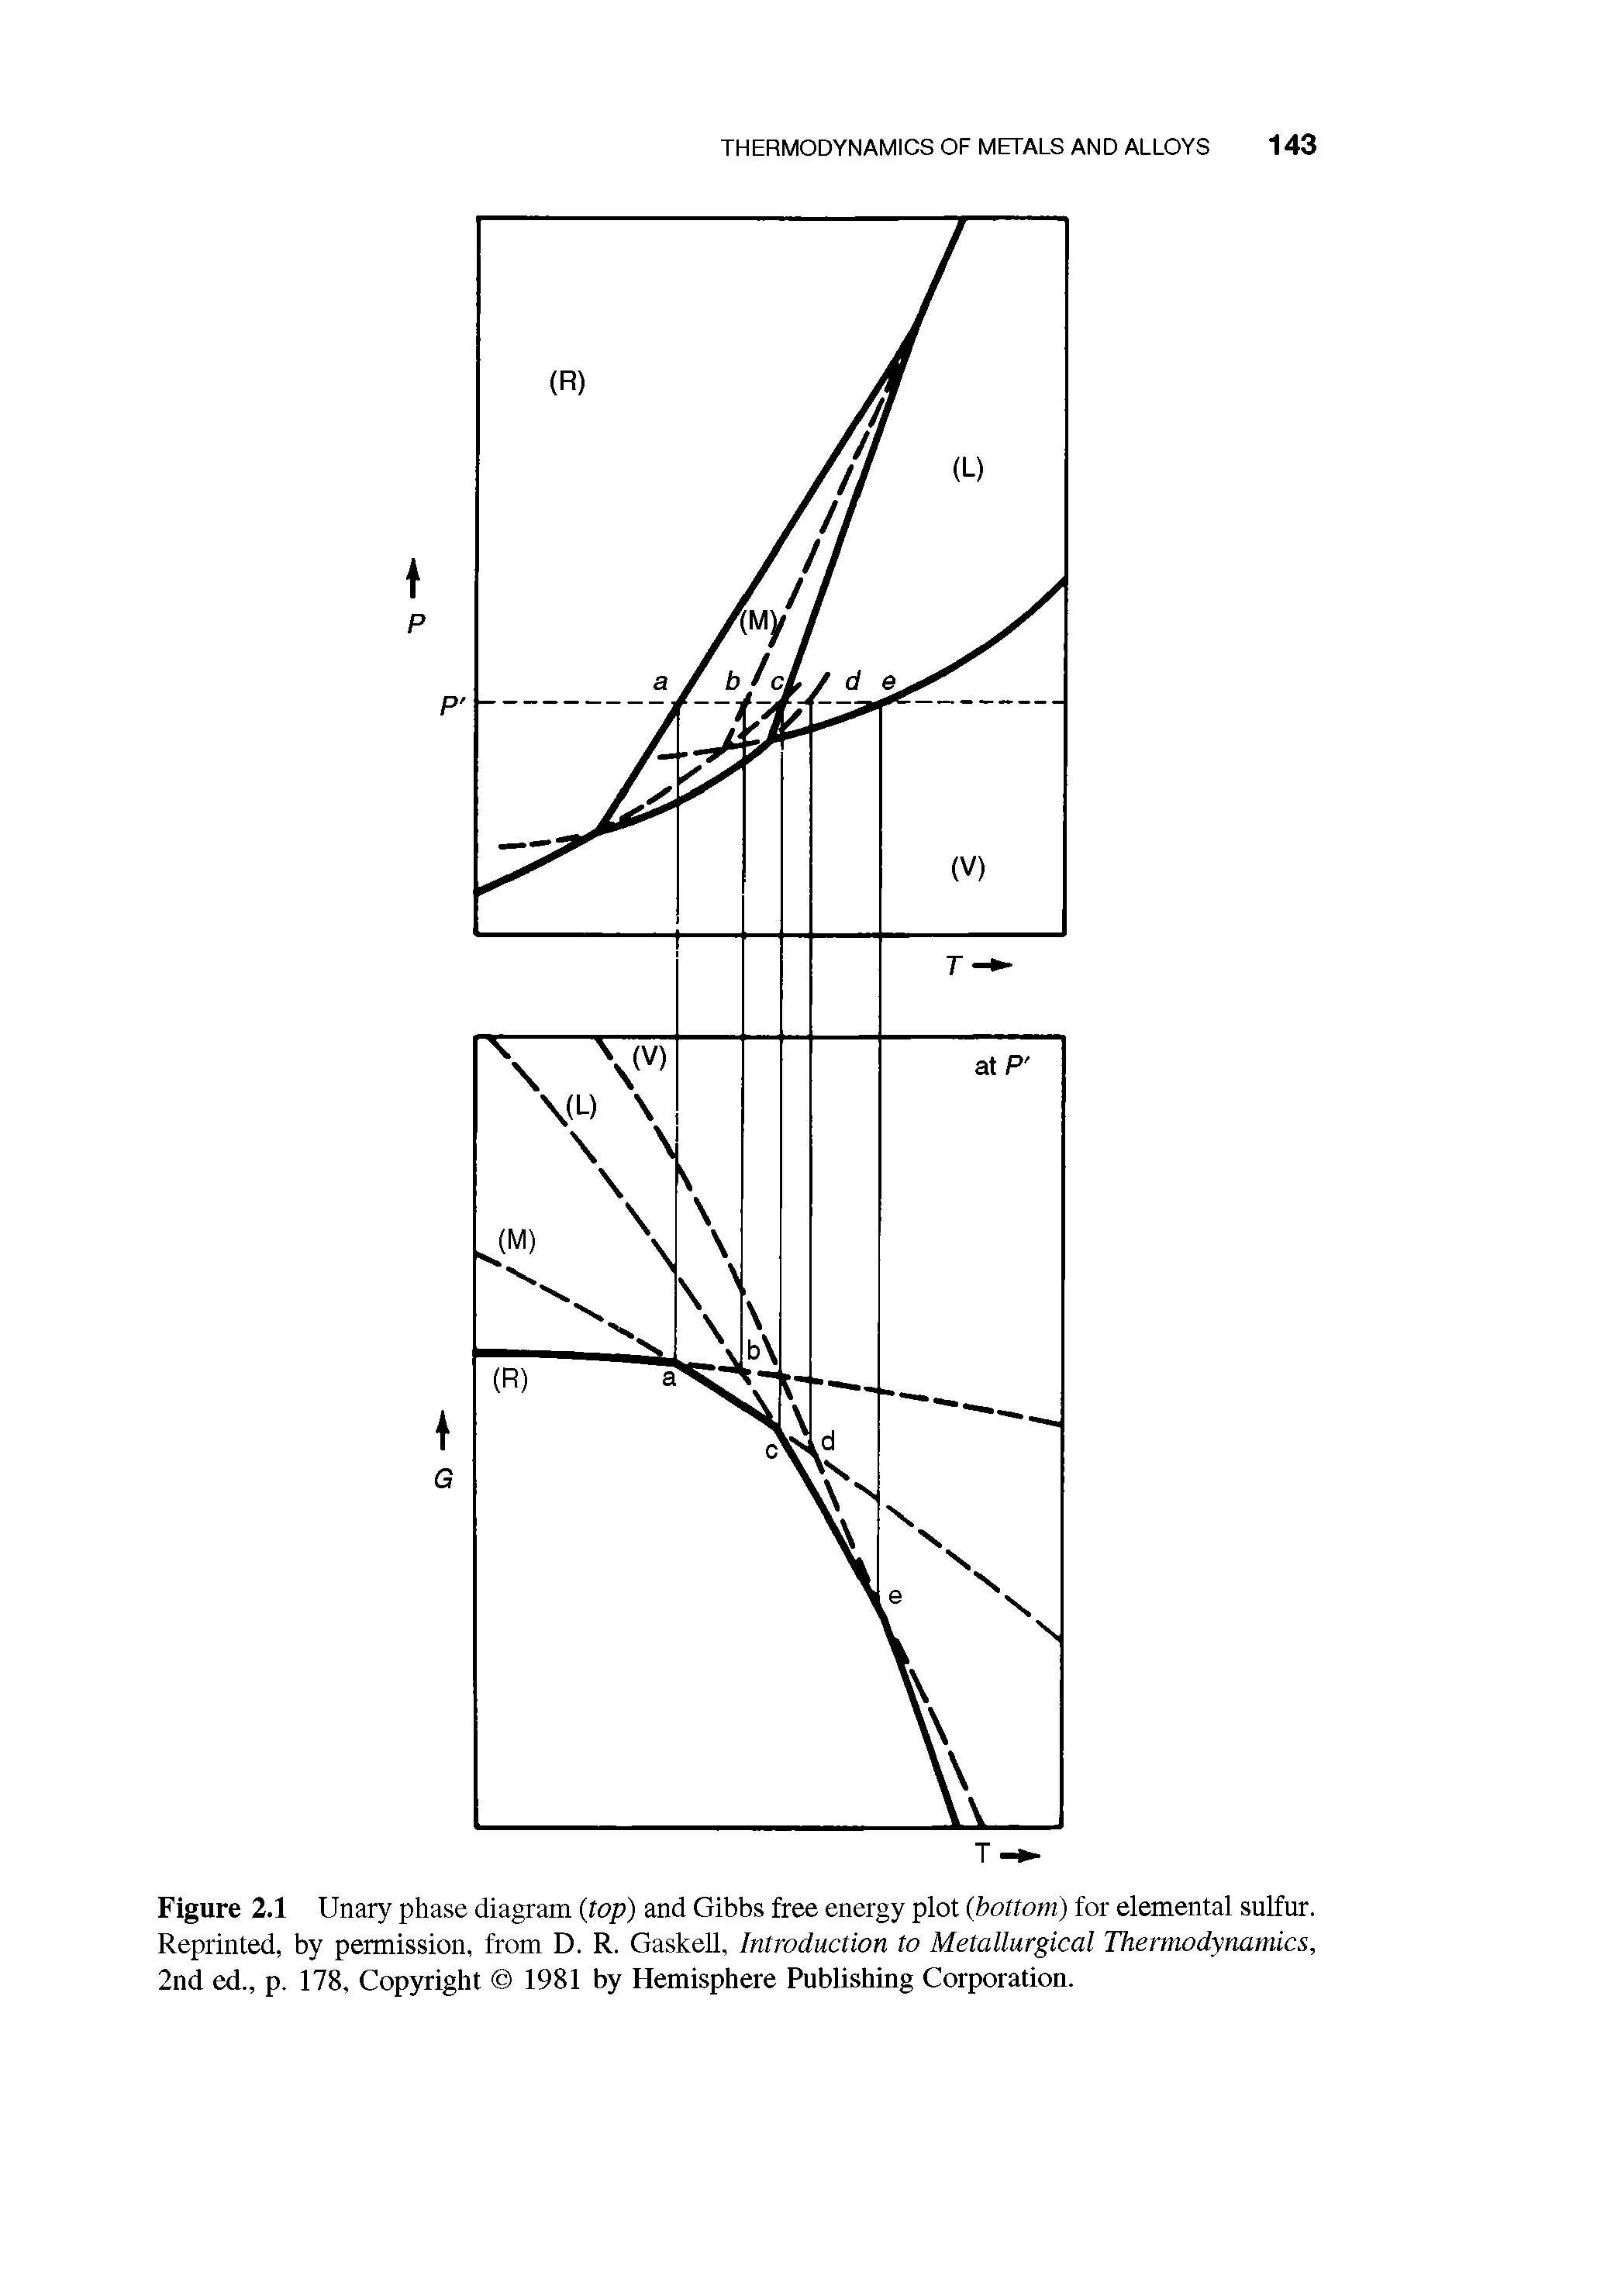 Figure 2.1 Unary phase diagram (top) and Gibbs free energy plot (bottom) for elemental sulfur. Reprinted, by permission, from D. R. Gaskell, Introduction to Metallurgical Thermodynamics, 2nd ed., p. 178, Copyright 1981 by Hemisphere Publishing Corporation.